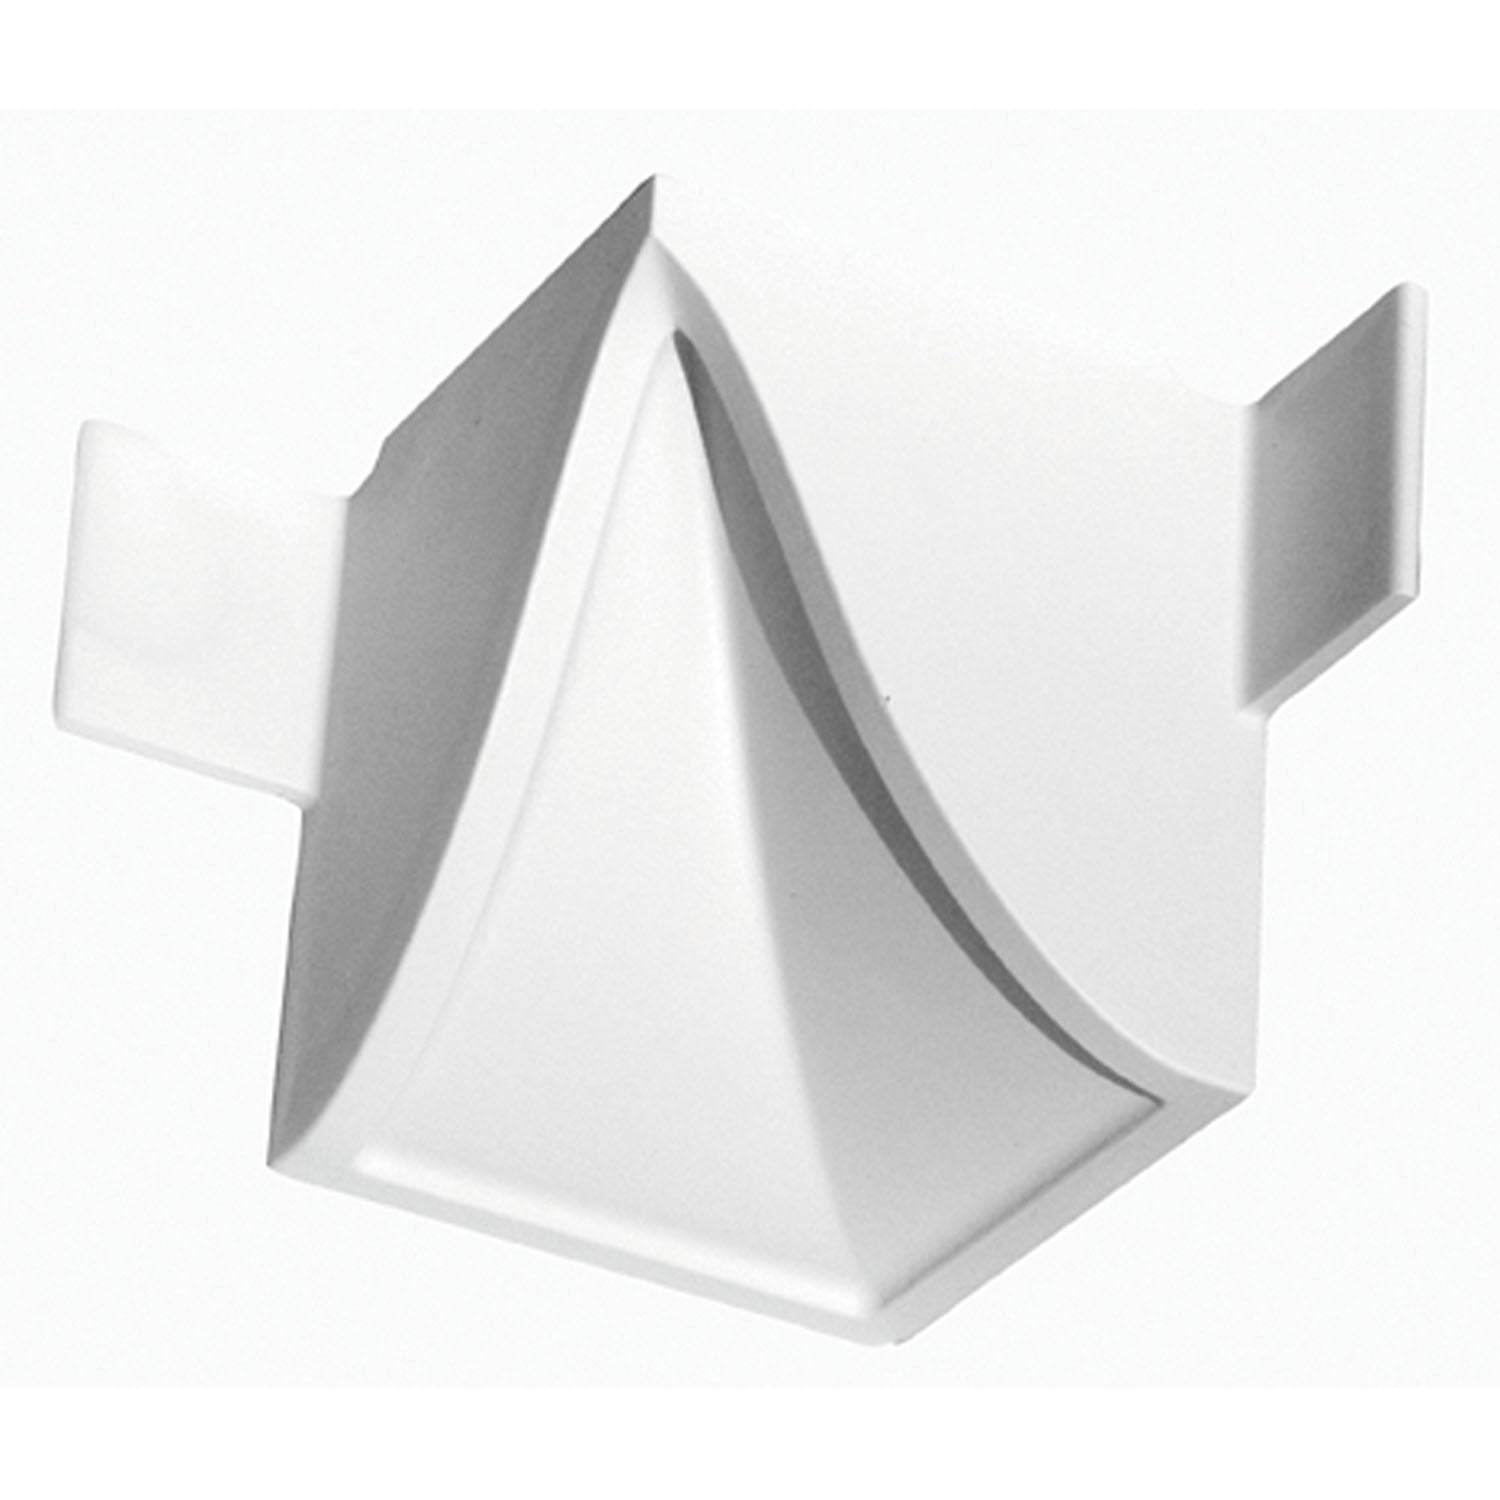 Focal Point Lighting 21615 Accessories 4 1/8 Quick Clips System A Inside Corner Block, Decor White